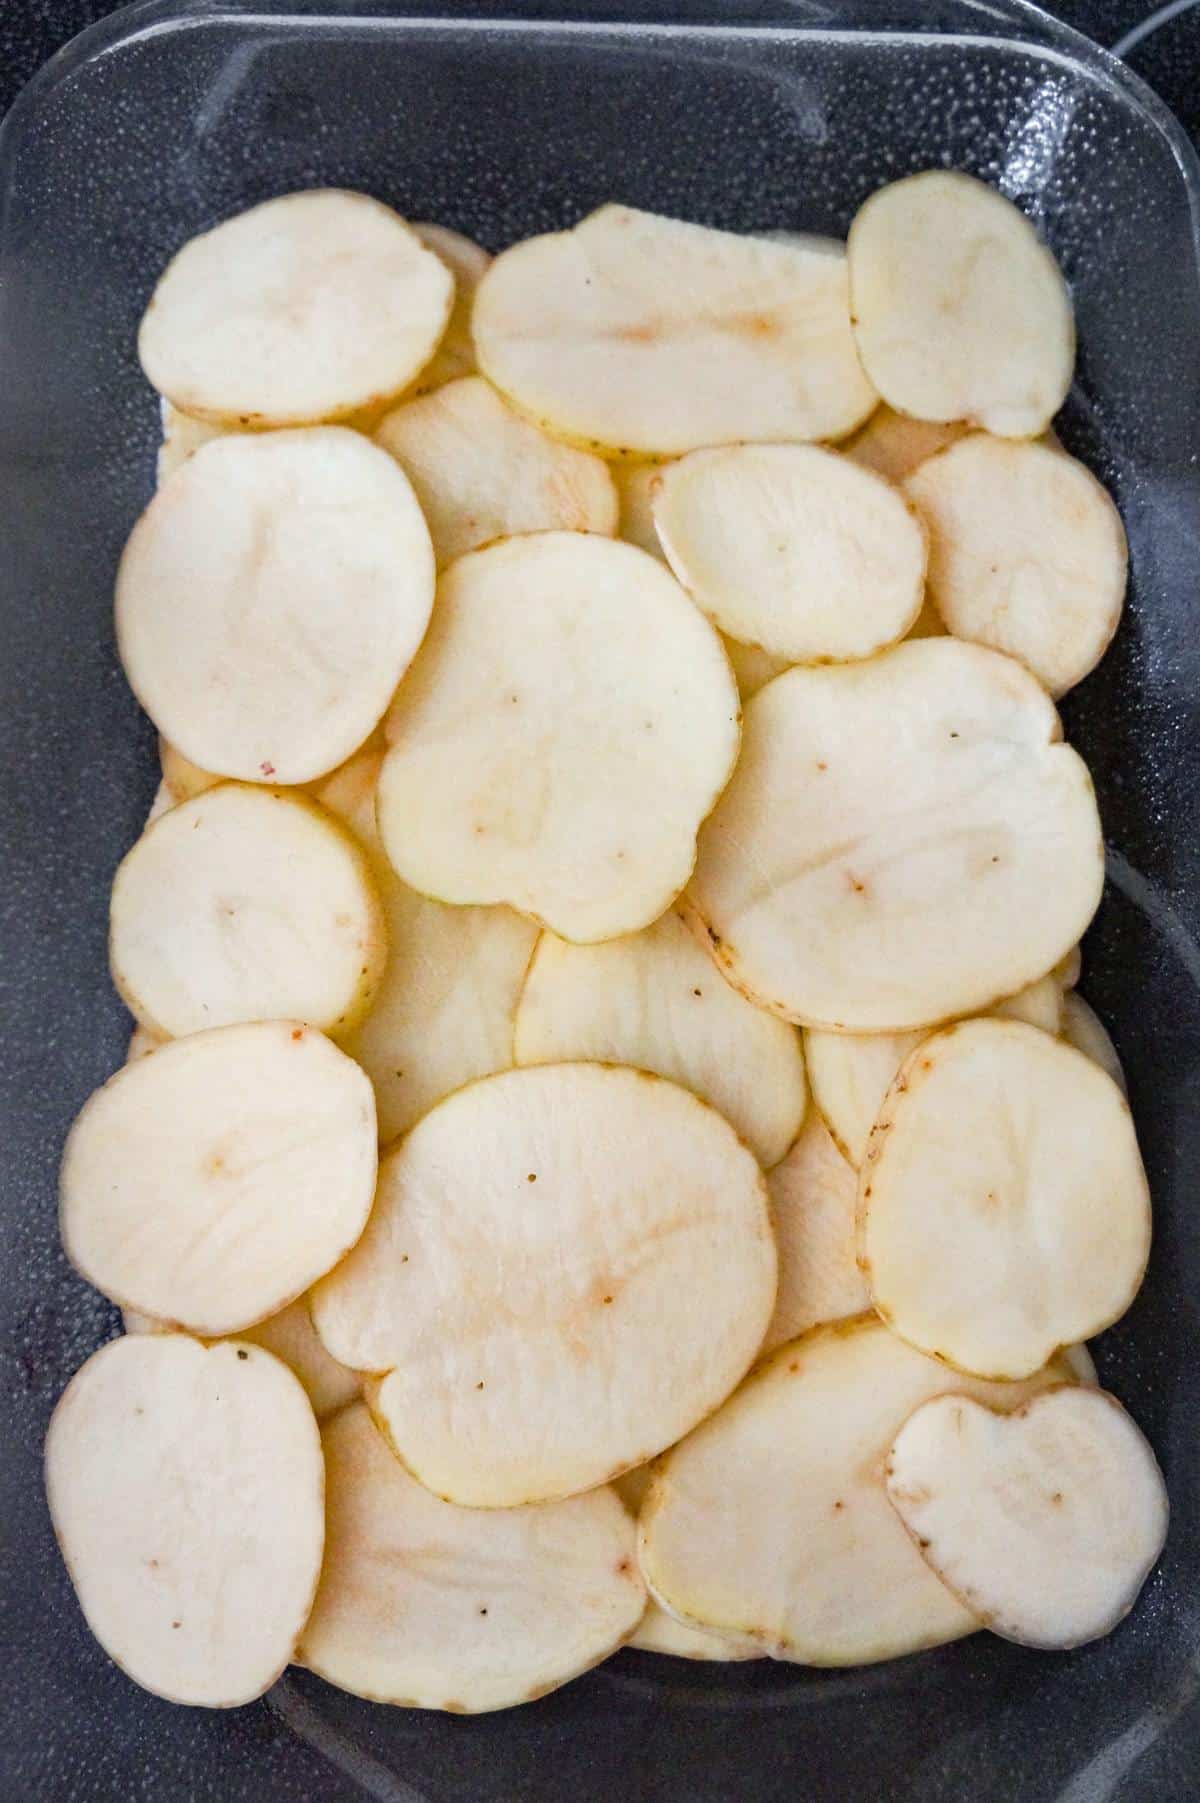 sliced potatoes in a 9 x 13 inch baking dish